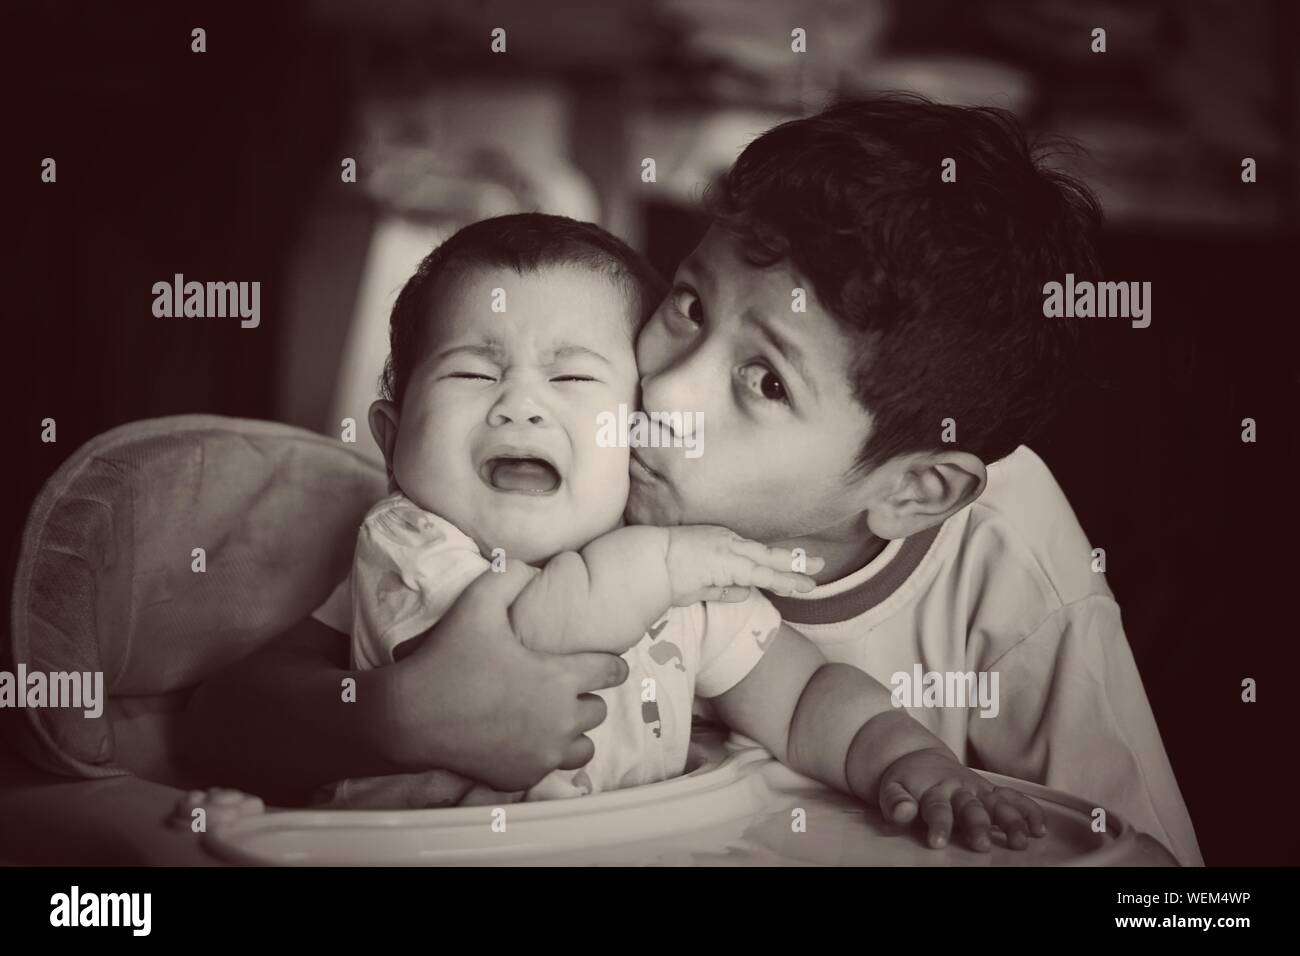 Portrait Of Brother Kissing Sister In Baby Walker At Home Stock Photo